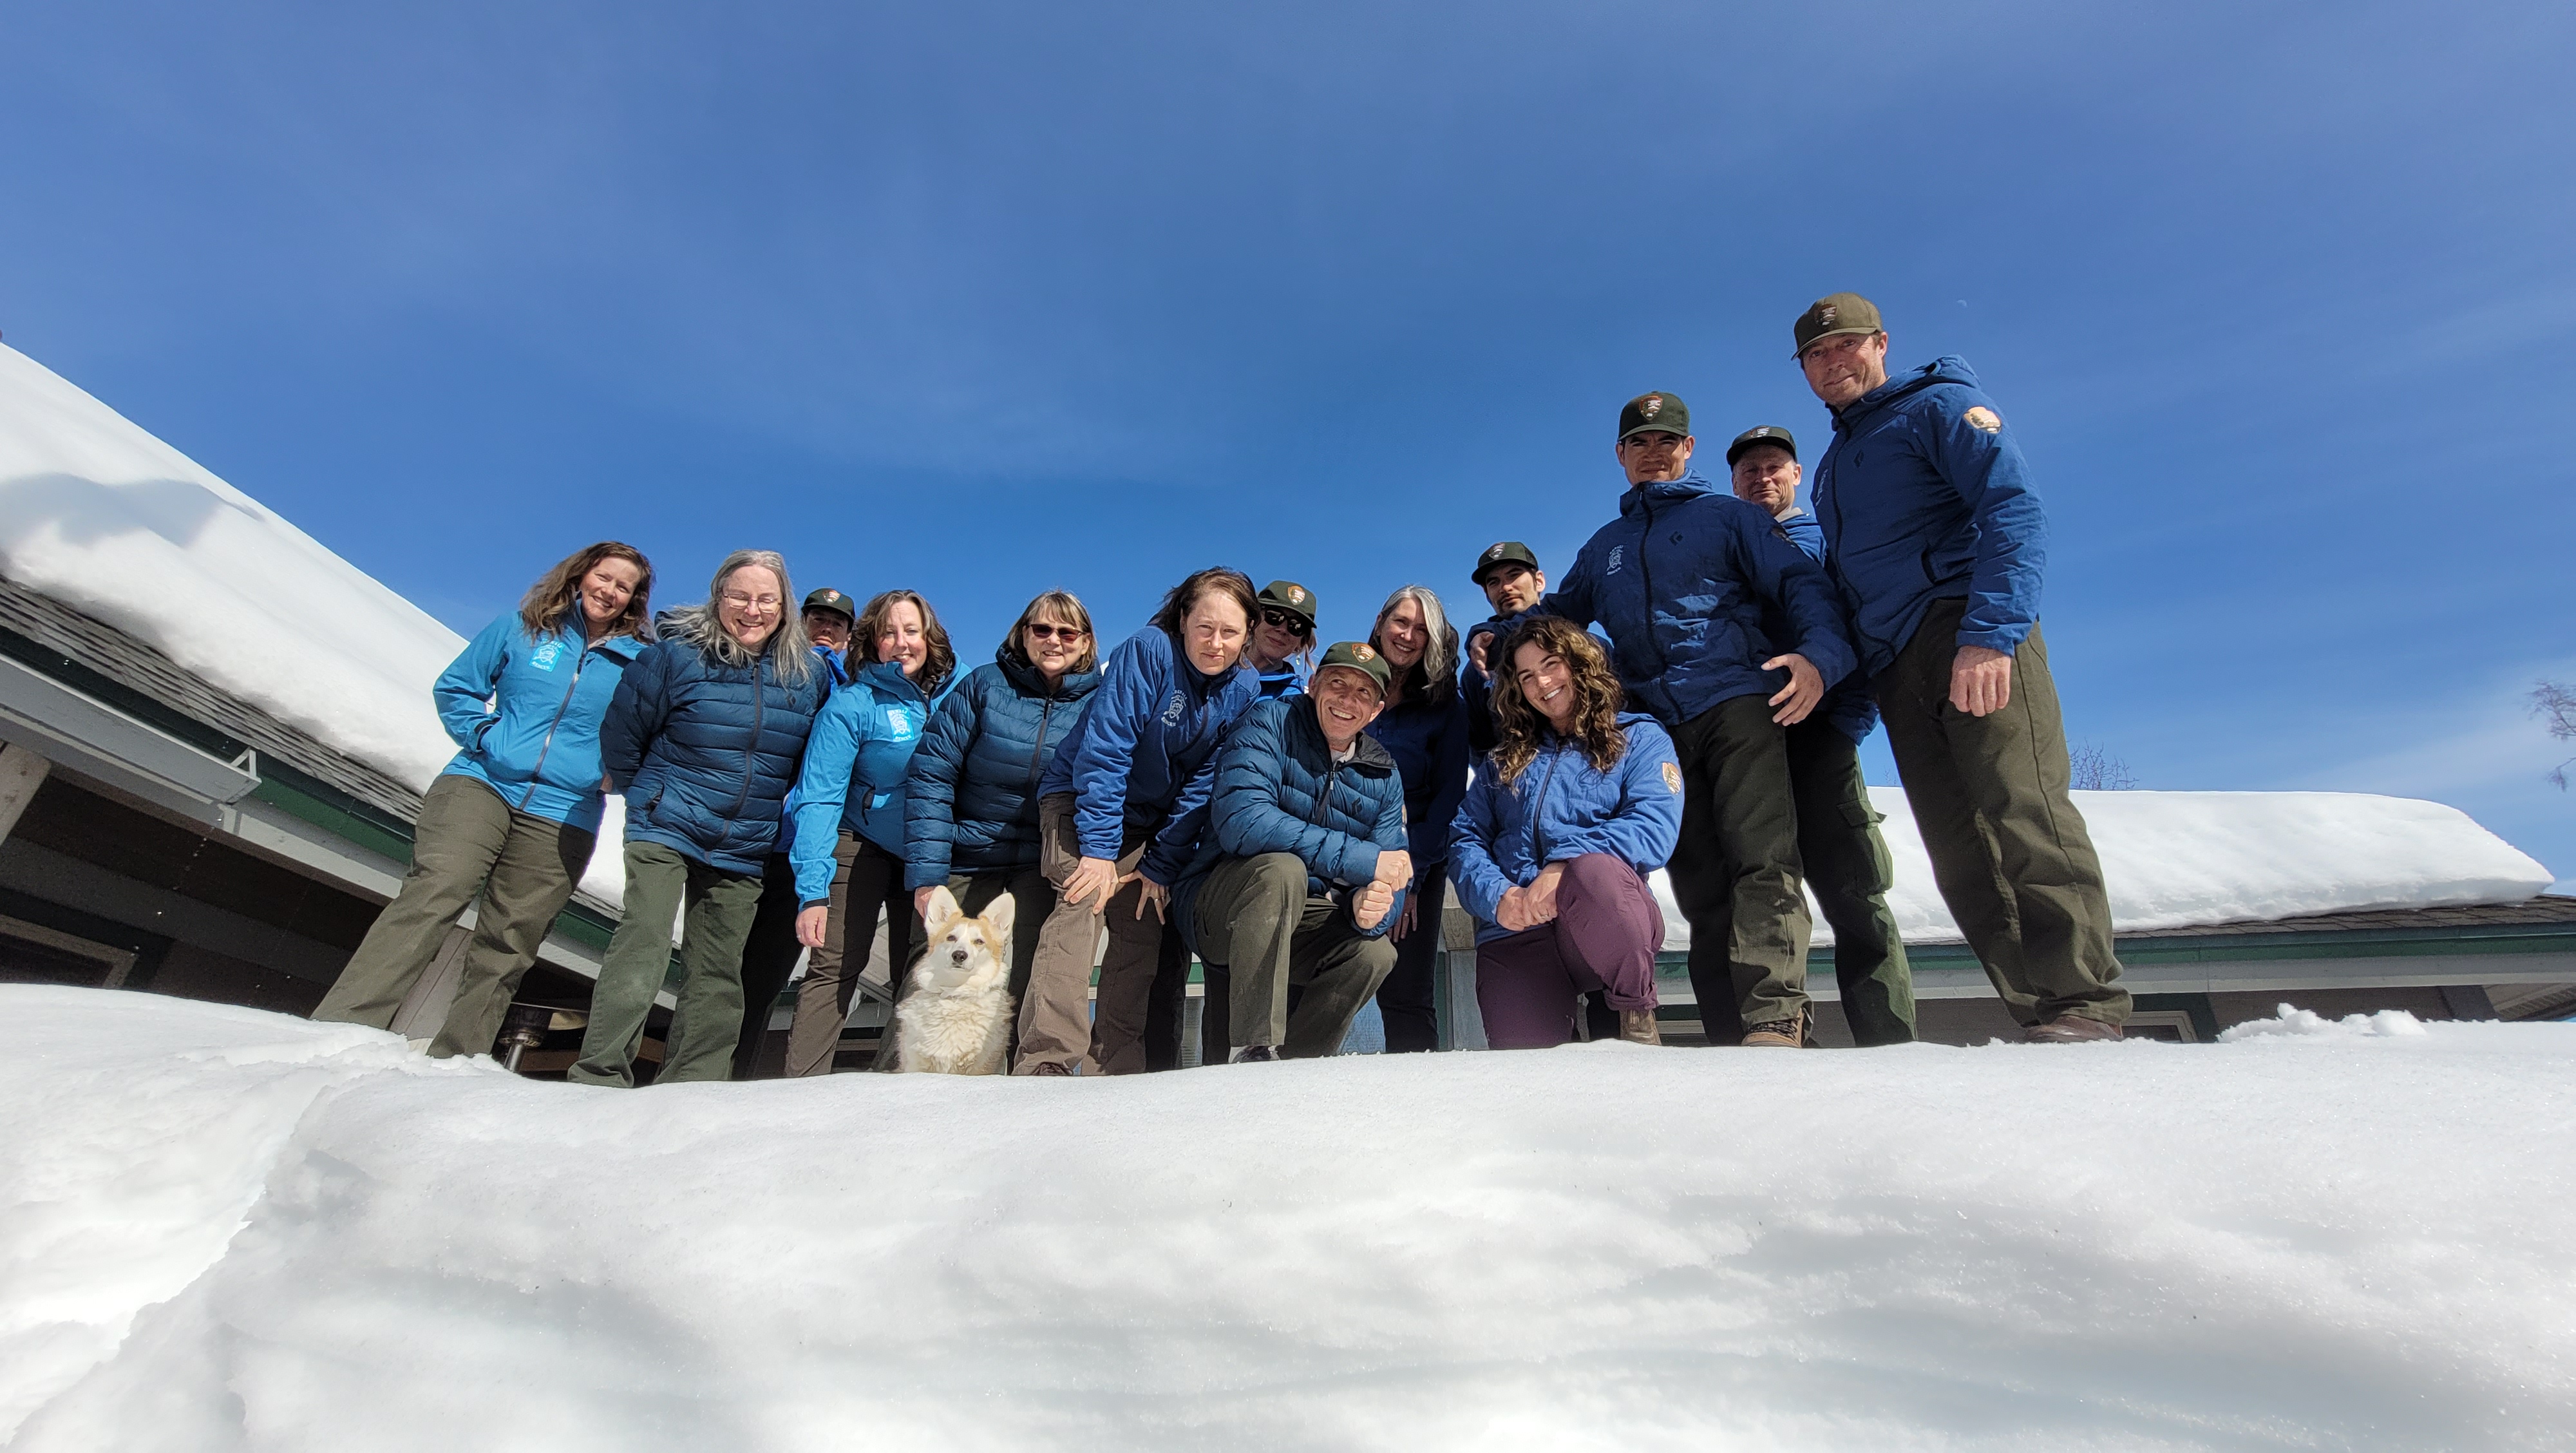 A work team looks down at the camera from a high snow bank outside of a ranger station